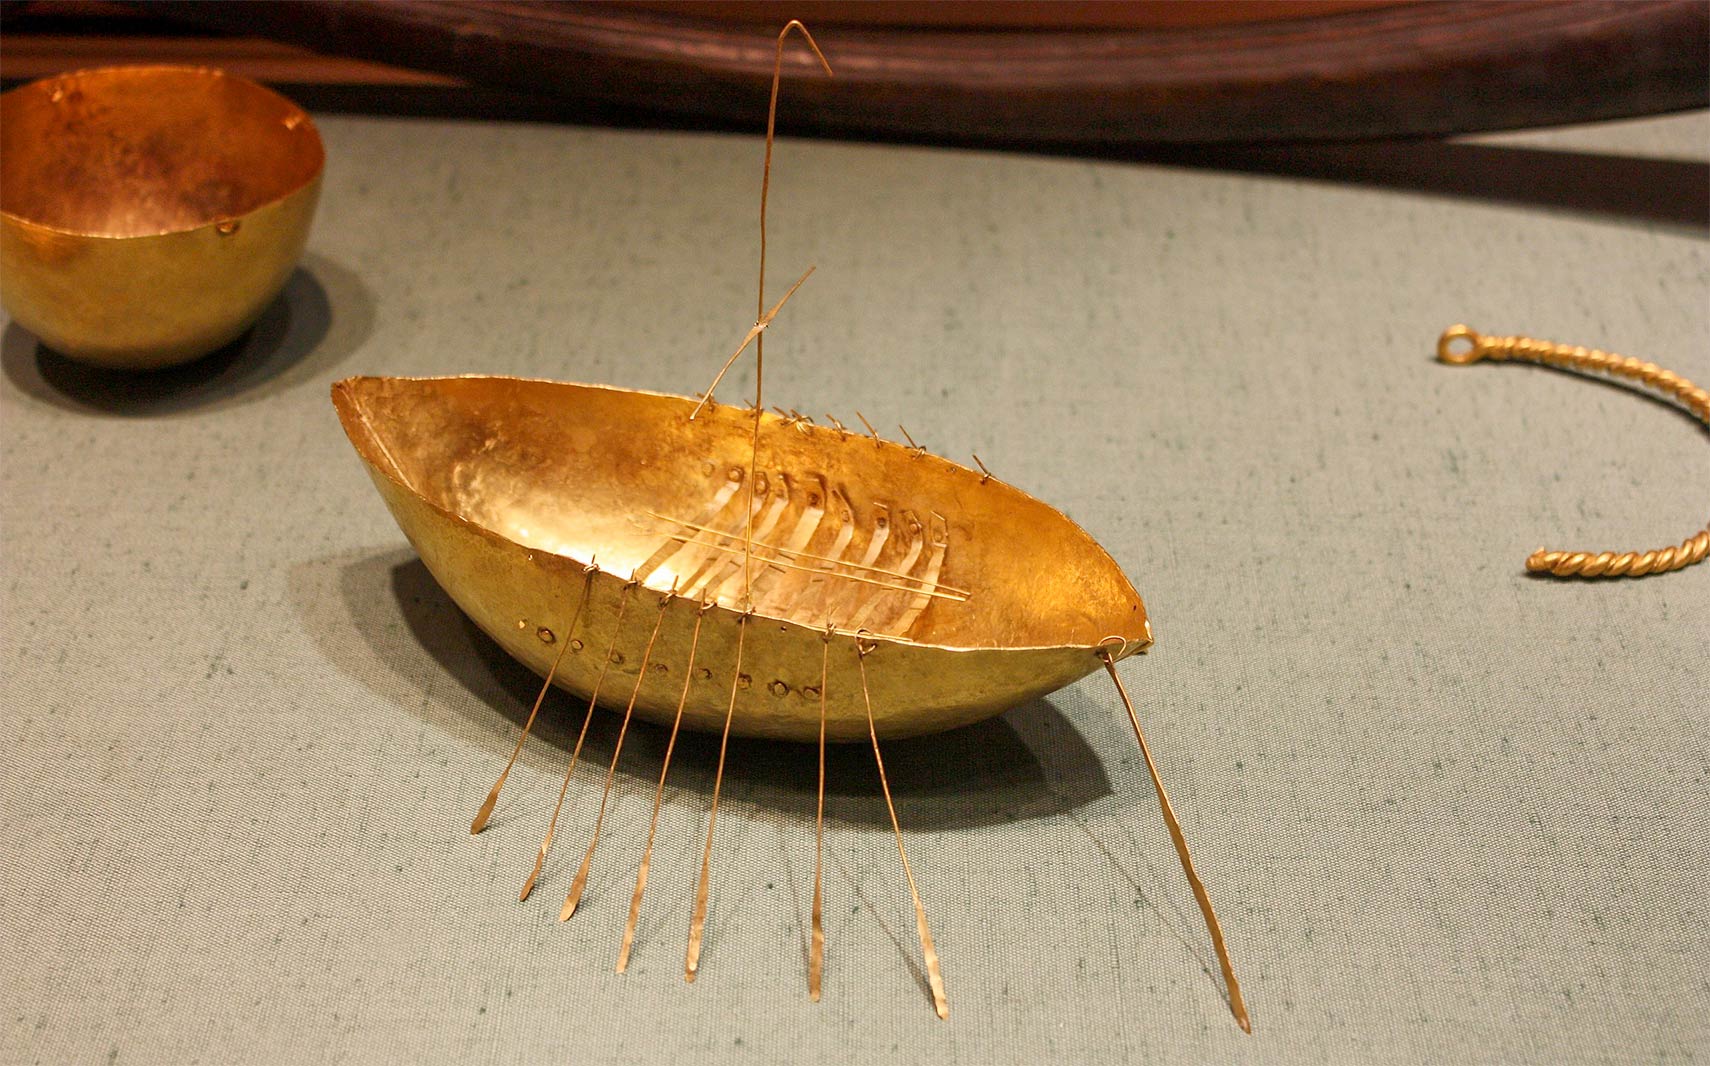 Broighter Gold in the National Museum of Ireland